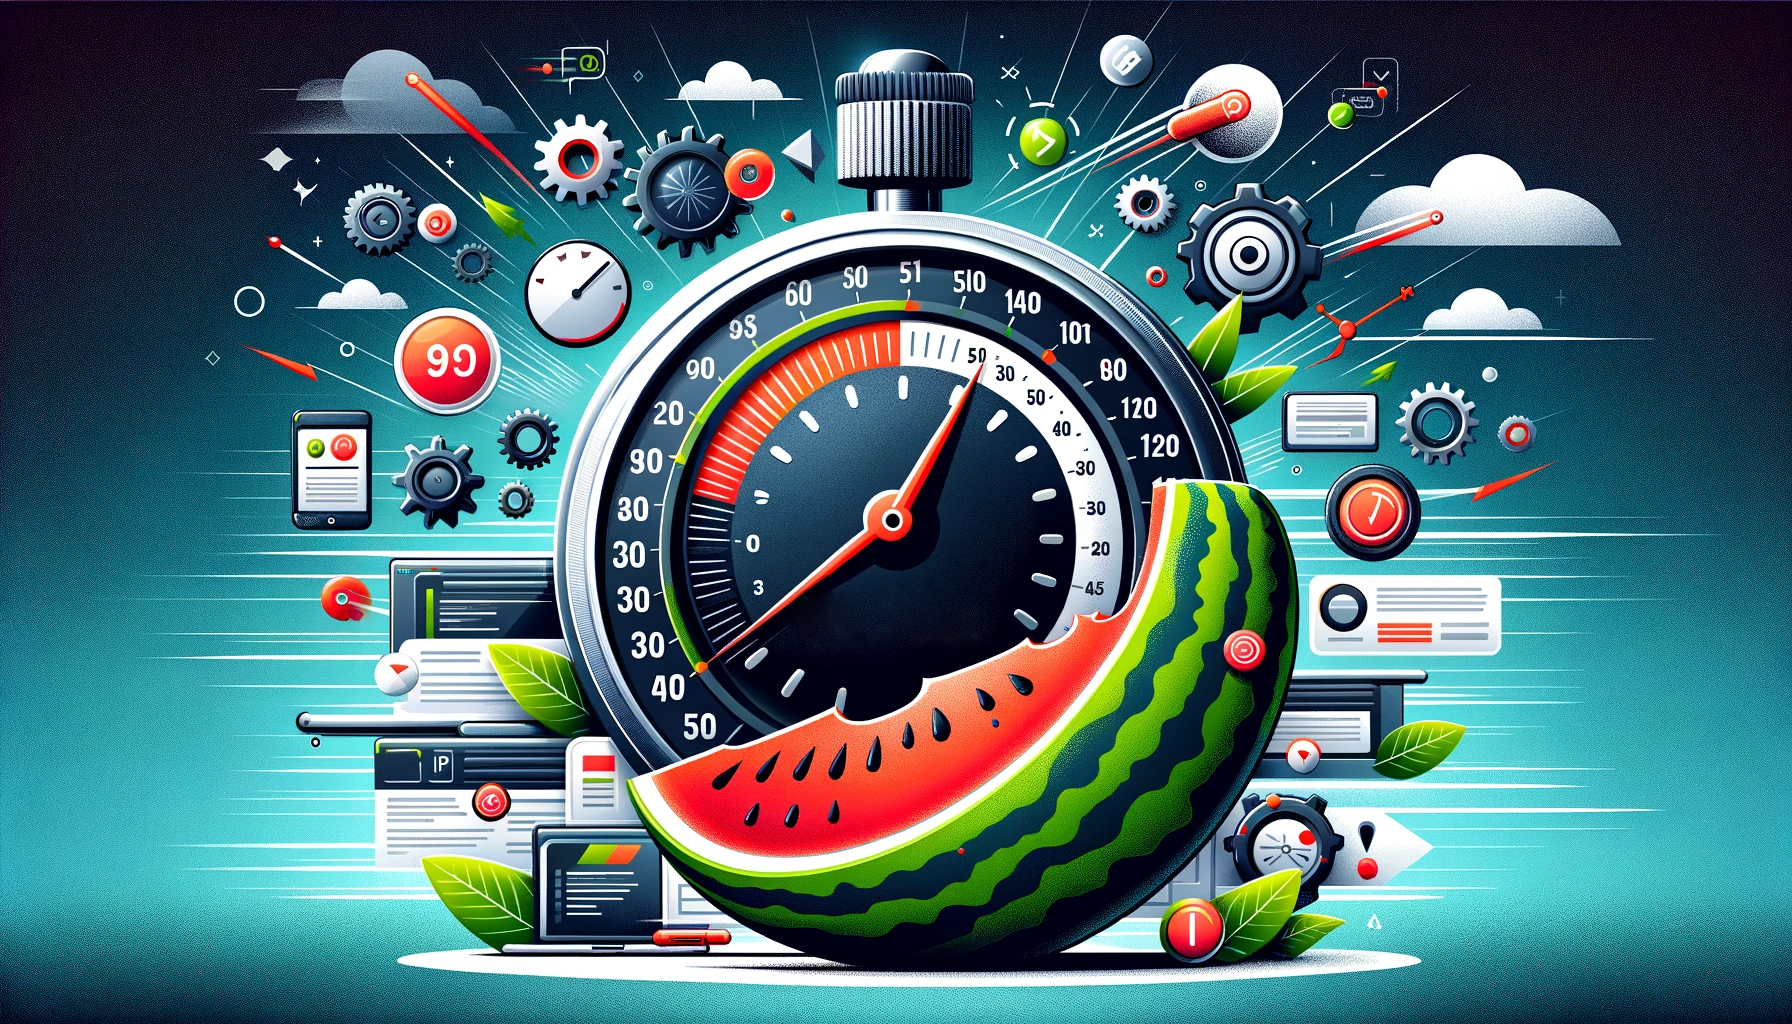 A vibrant illustration melding a watermelon with a speedometer amidst a dynamic backdrop of mechanical and technological elements, symbolizing the optimizing of website load time for better performance.